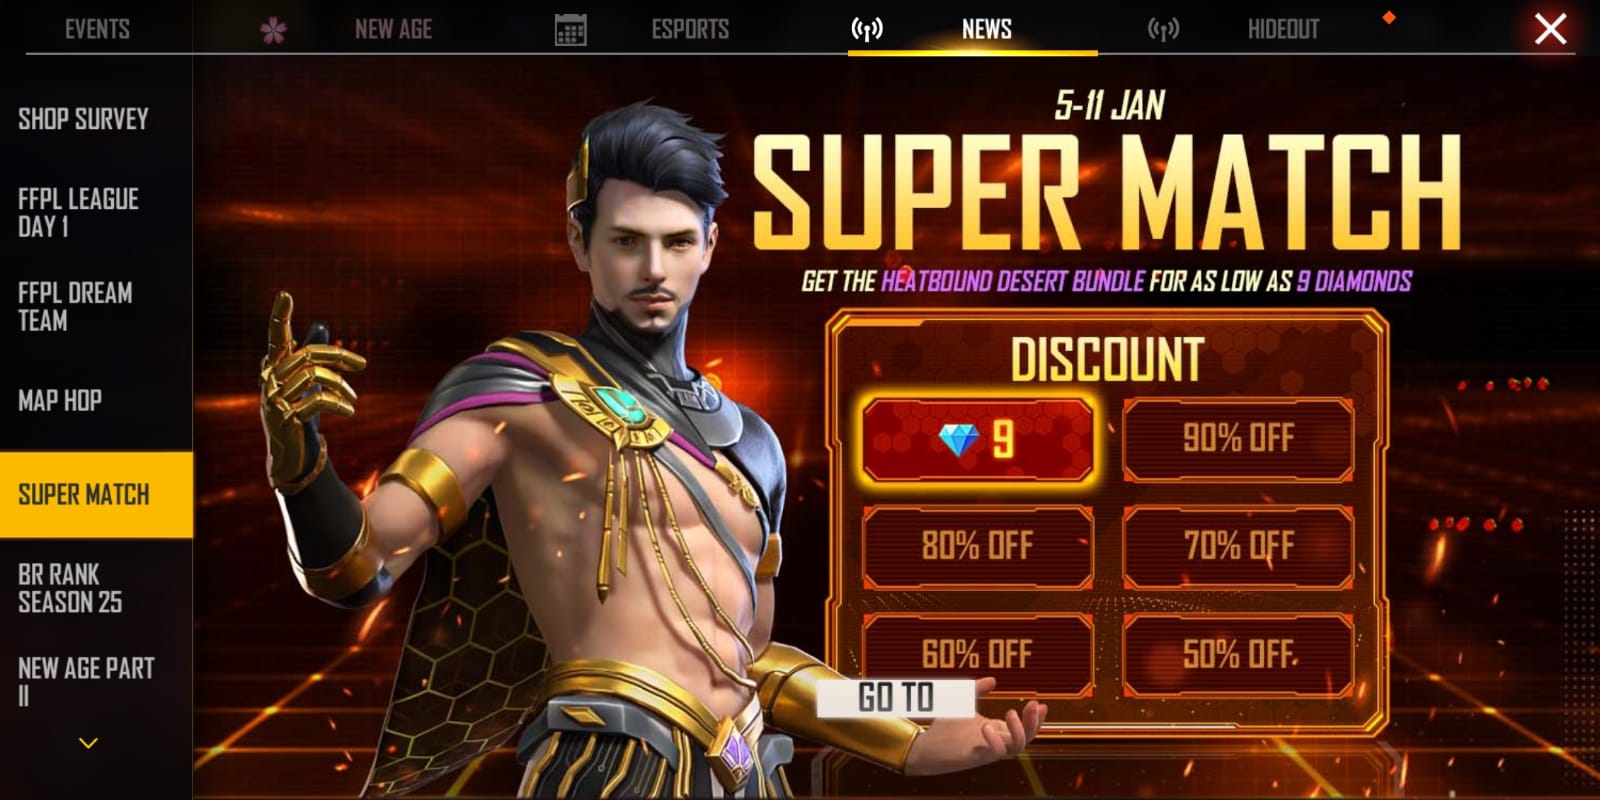 Garena Free Fire Super Match Event: Get a chance to claim cool items including Heatbound Bundle for massive discounts, More Details